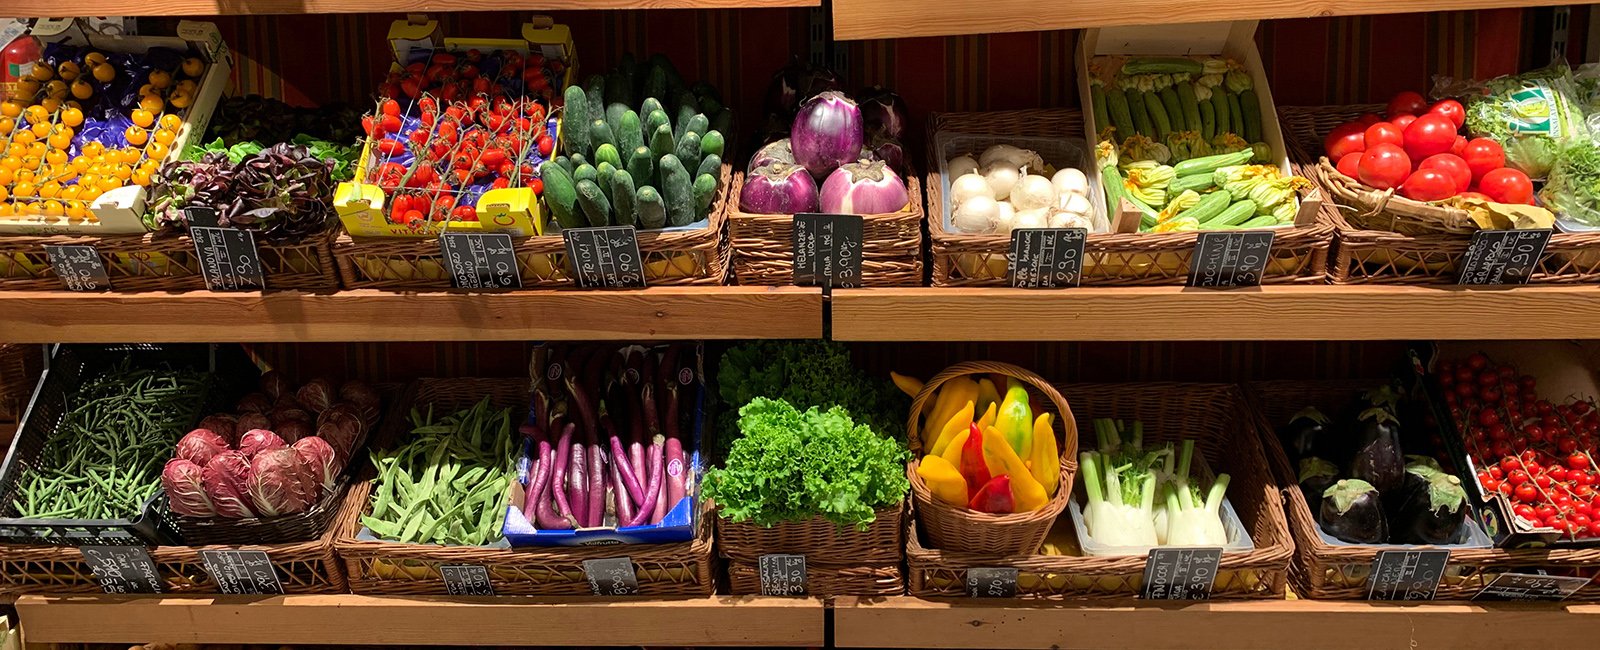 Grocery image